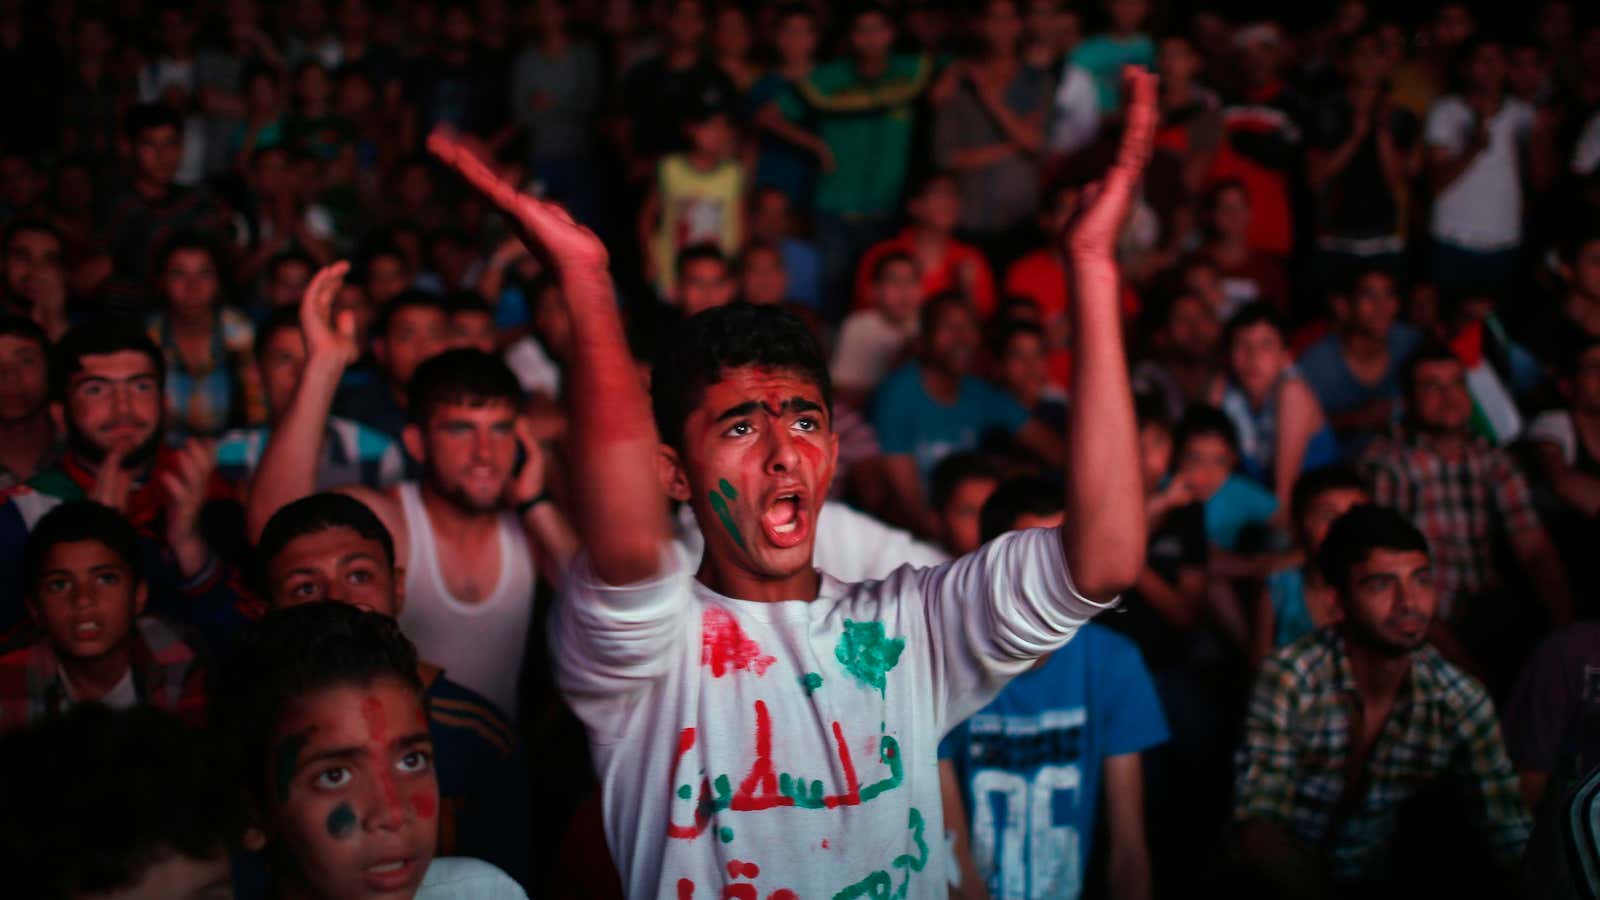 Palestinian soccer fans have something to cheer about.